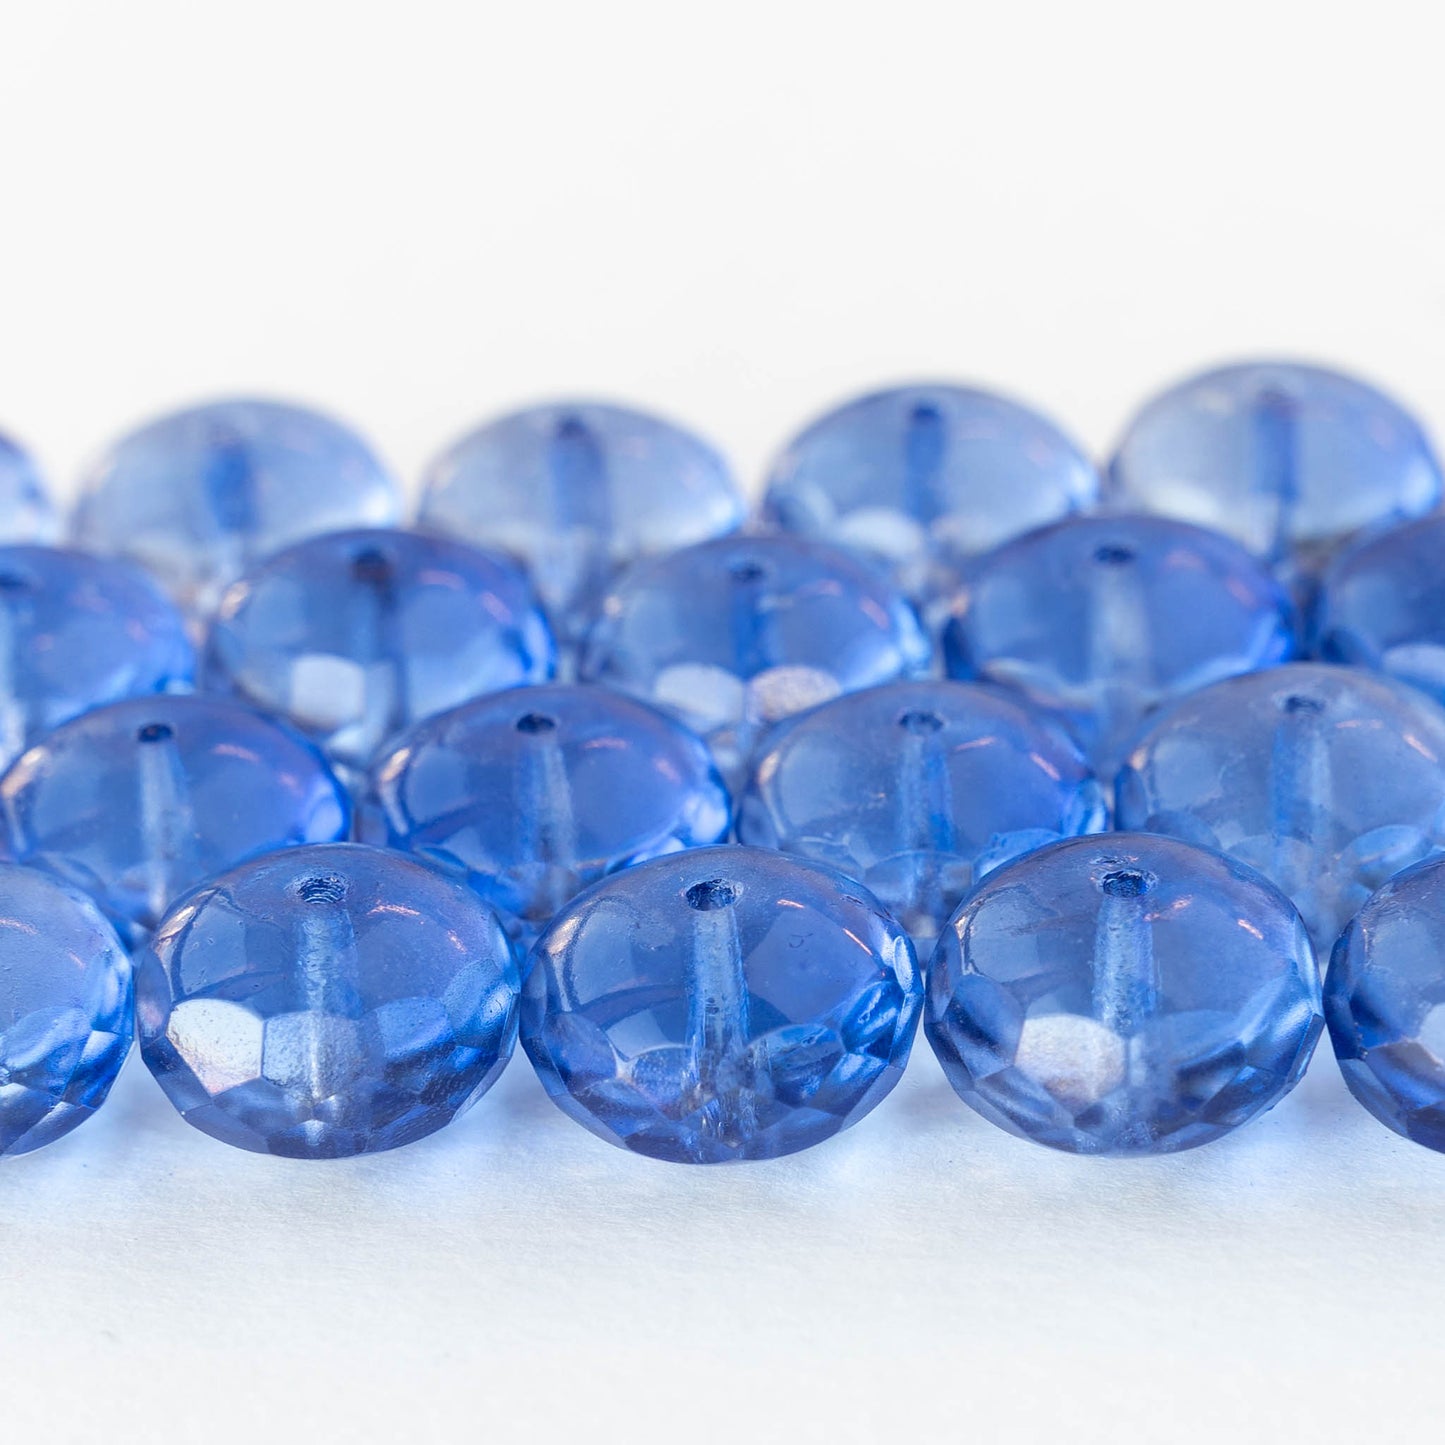 Load image into Gallery viewer, 11x17mm Firepolished Rondelle Beads - Light Tanzanite - 4 or 12 Beads
